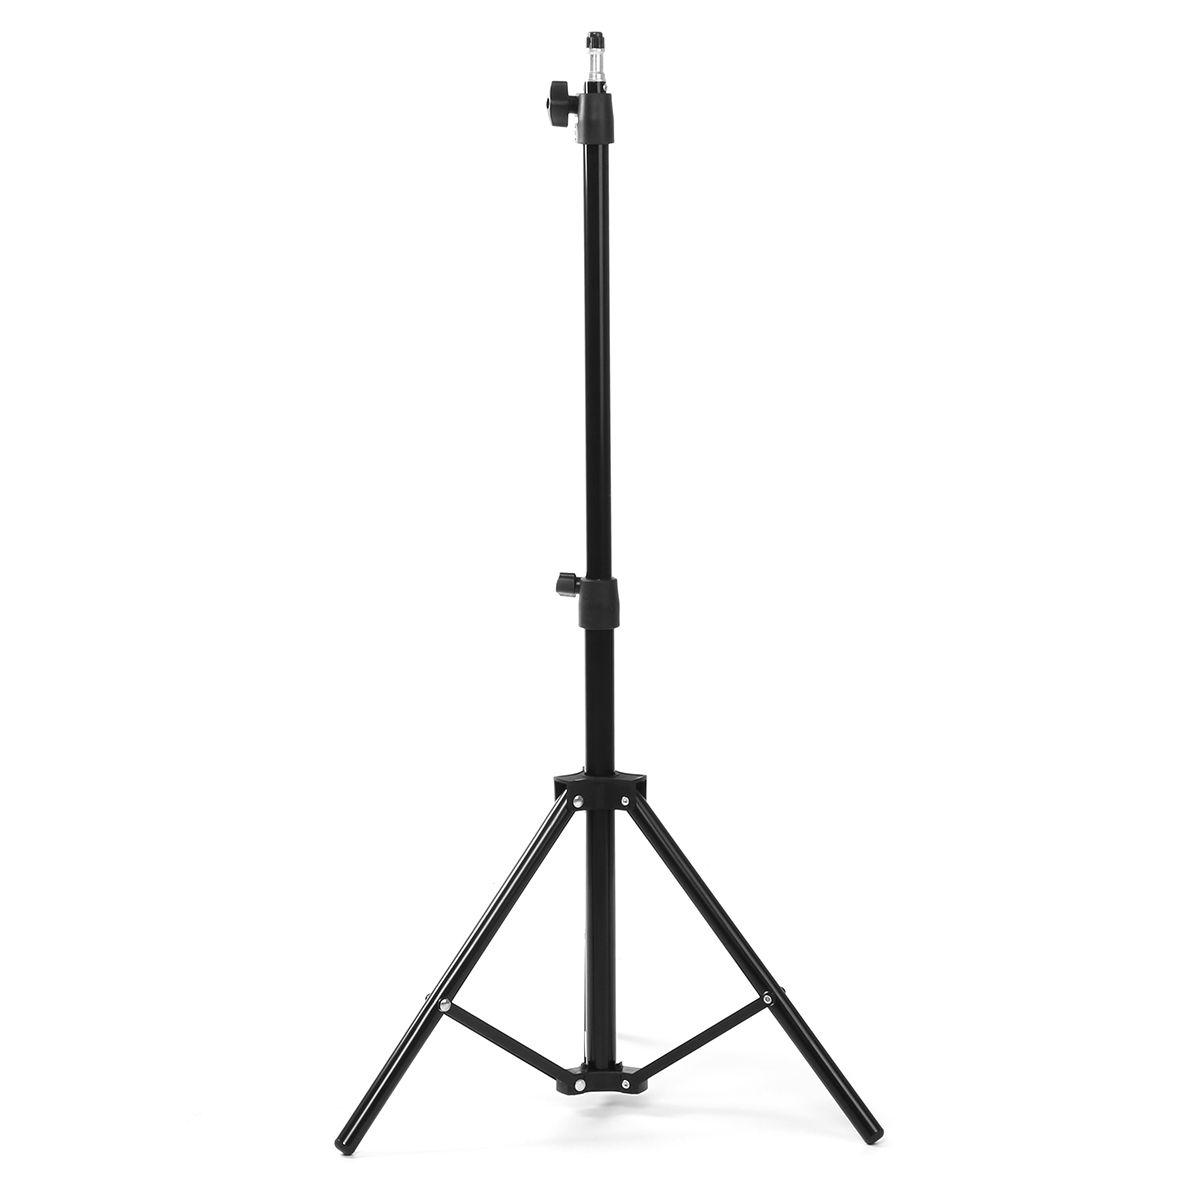 50cm-150cm-Portable-Extendable-Aluminum-Tripod-Stand-Video-Ring-Light-Stand-Photography-Fill-Light-H-1672424